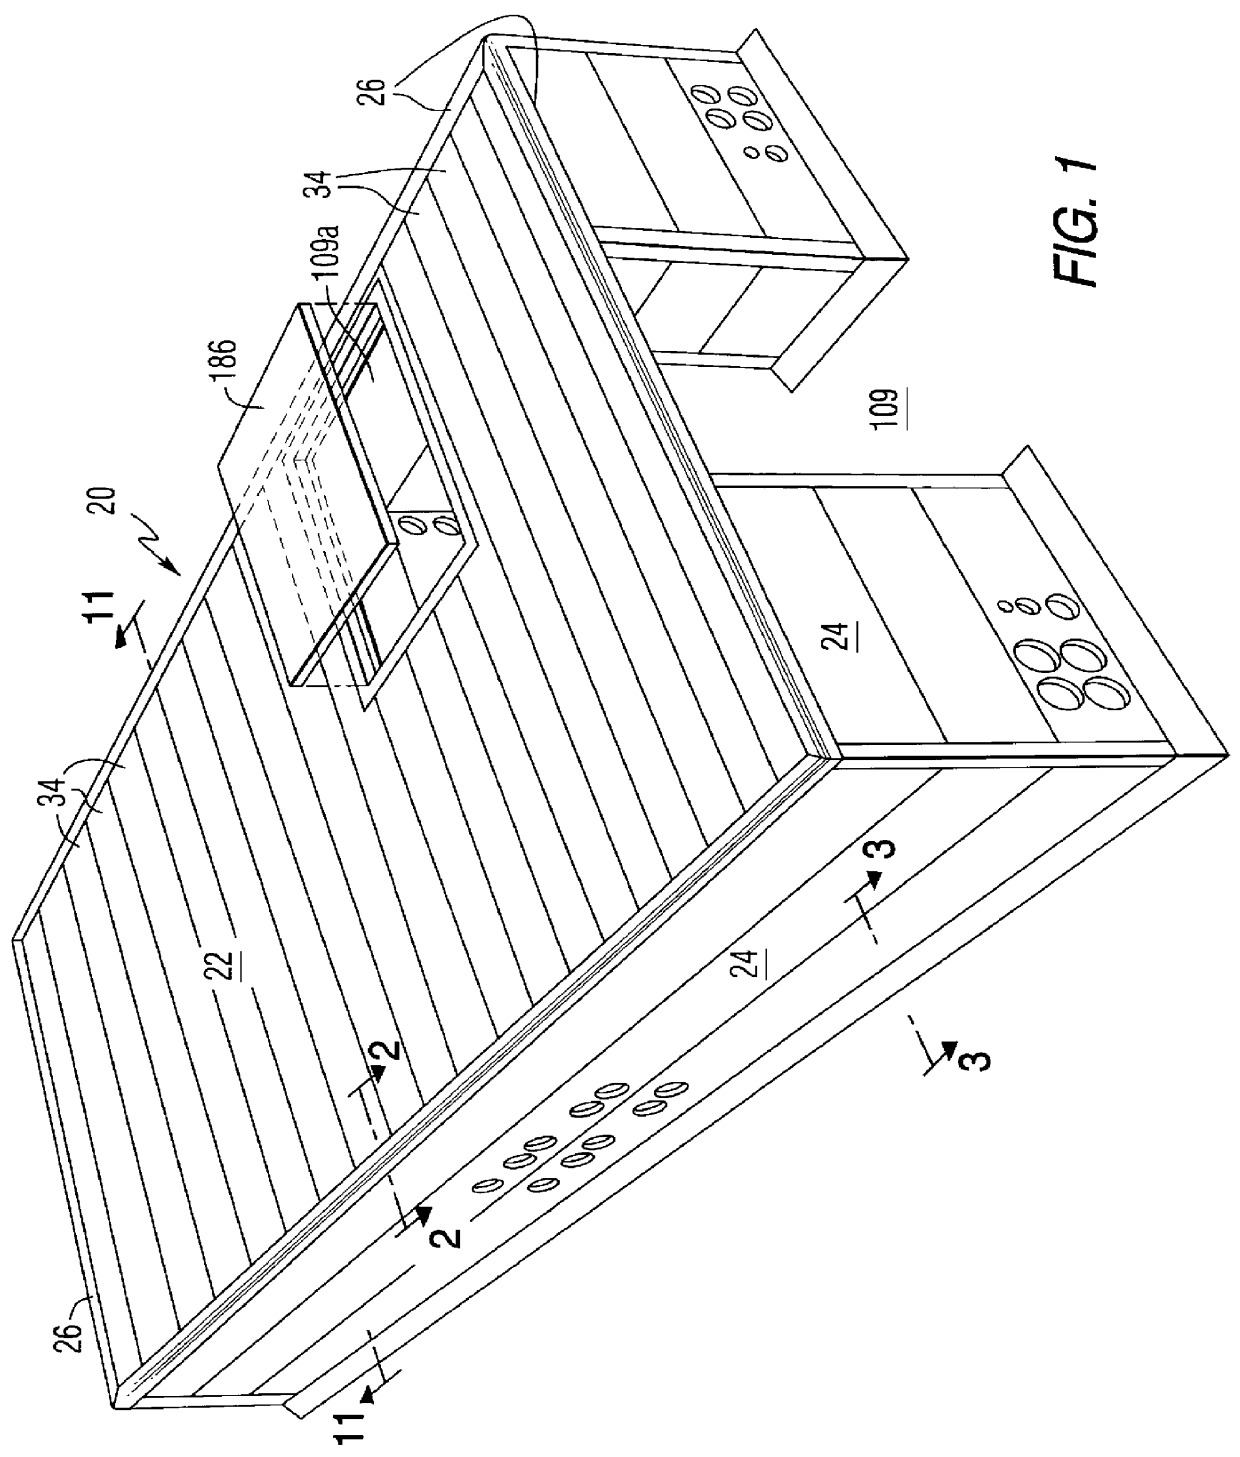 System and method for fabricating enclosures